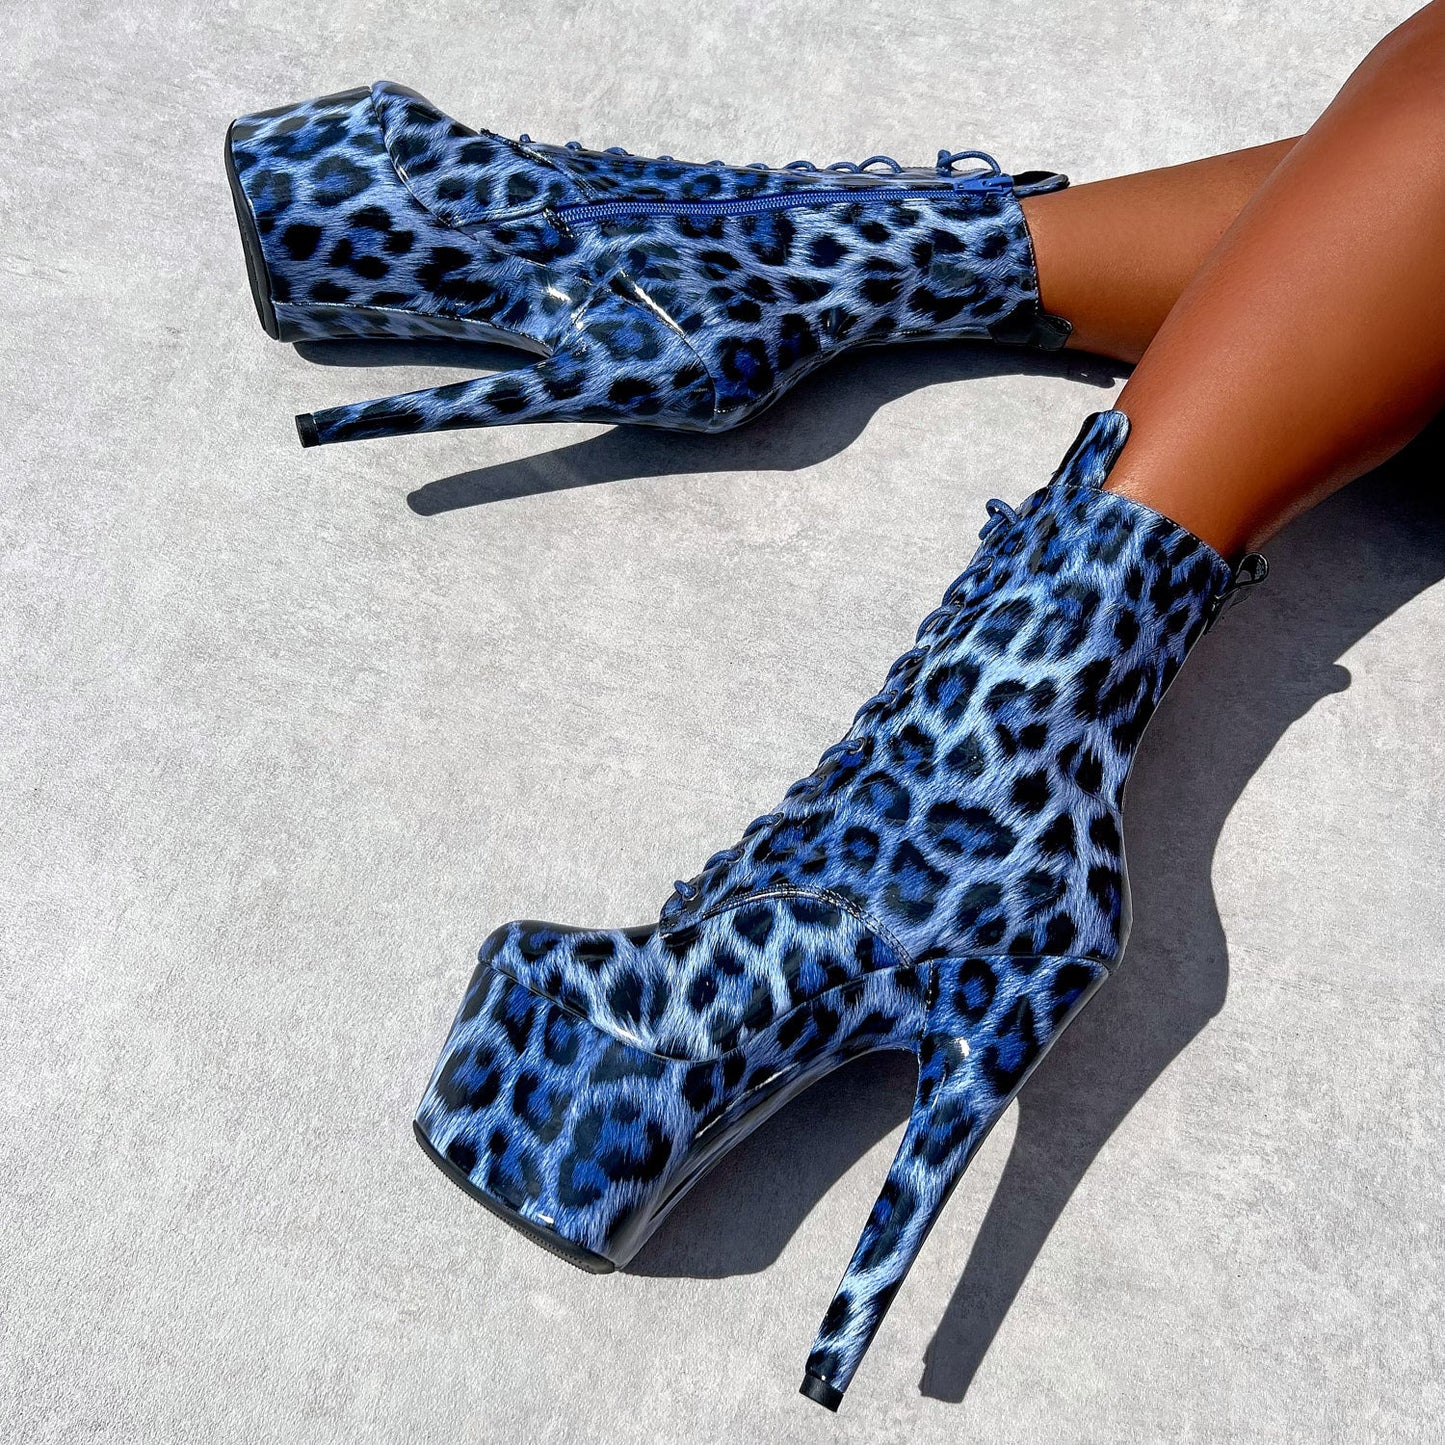 Blue Leopard Boot - 7 INCH + SP